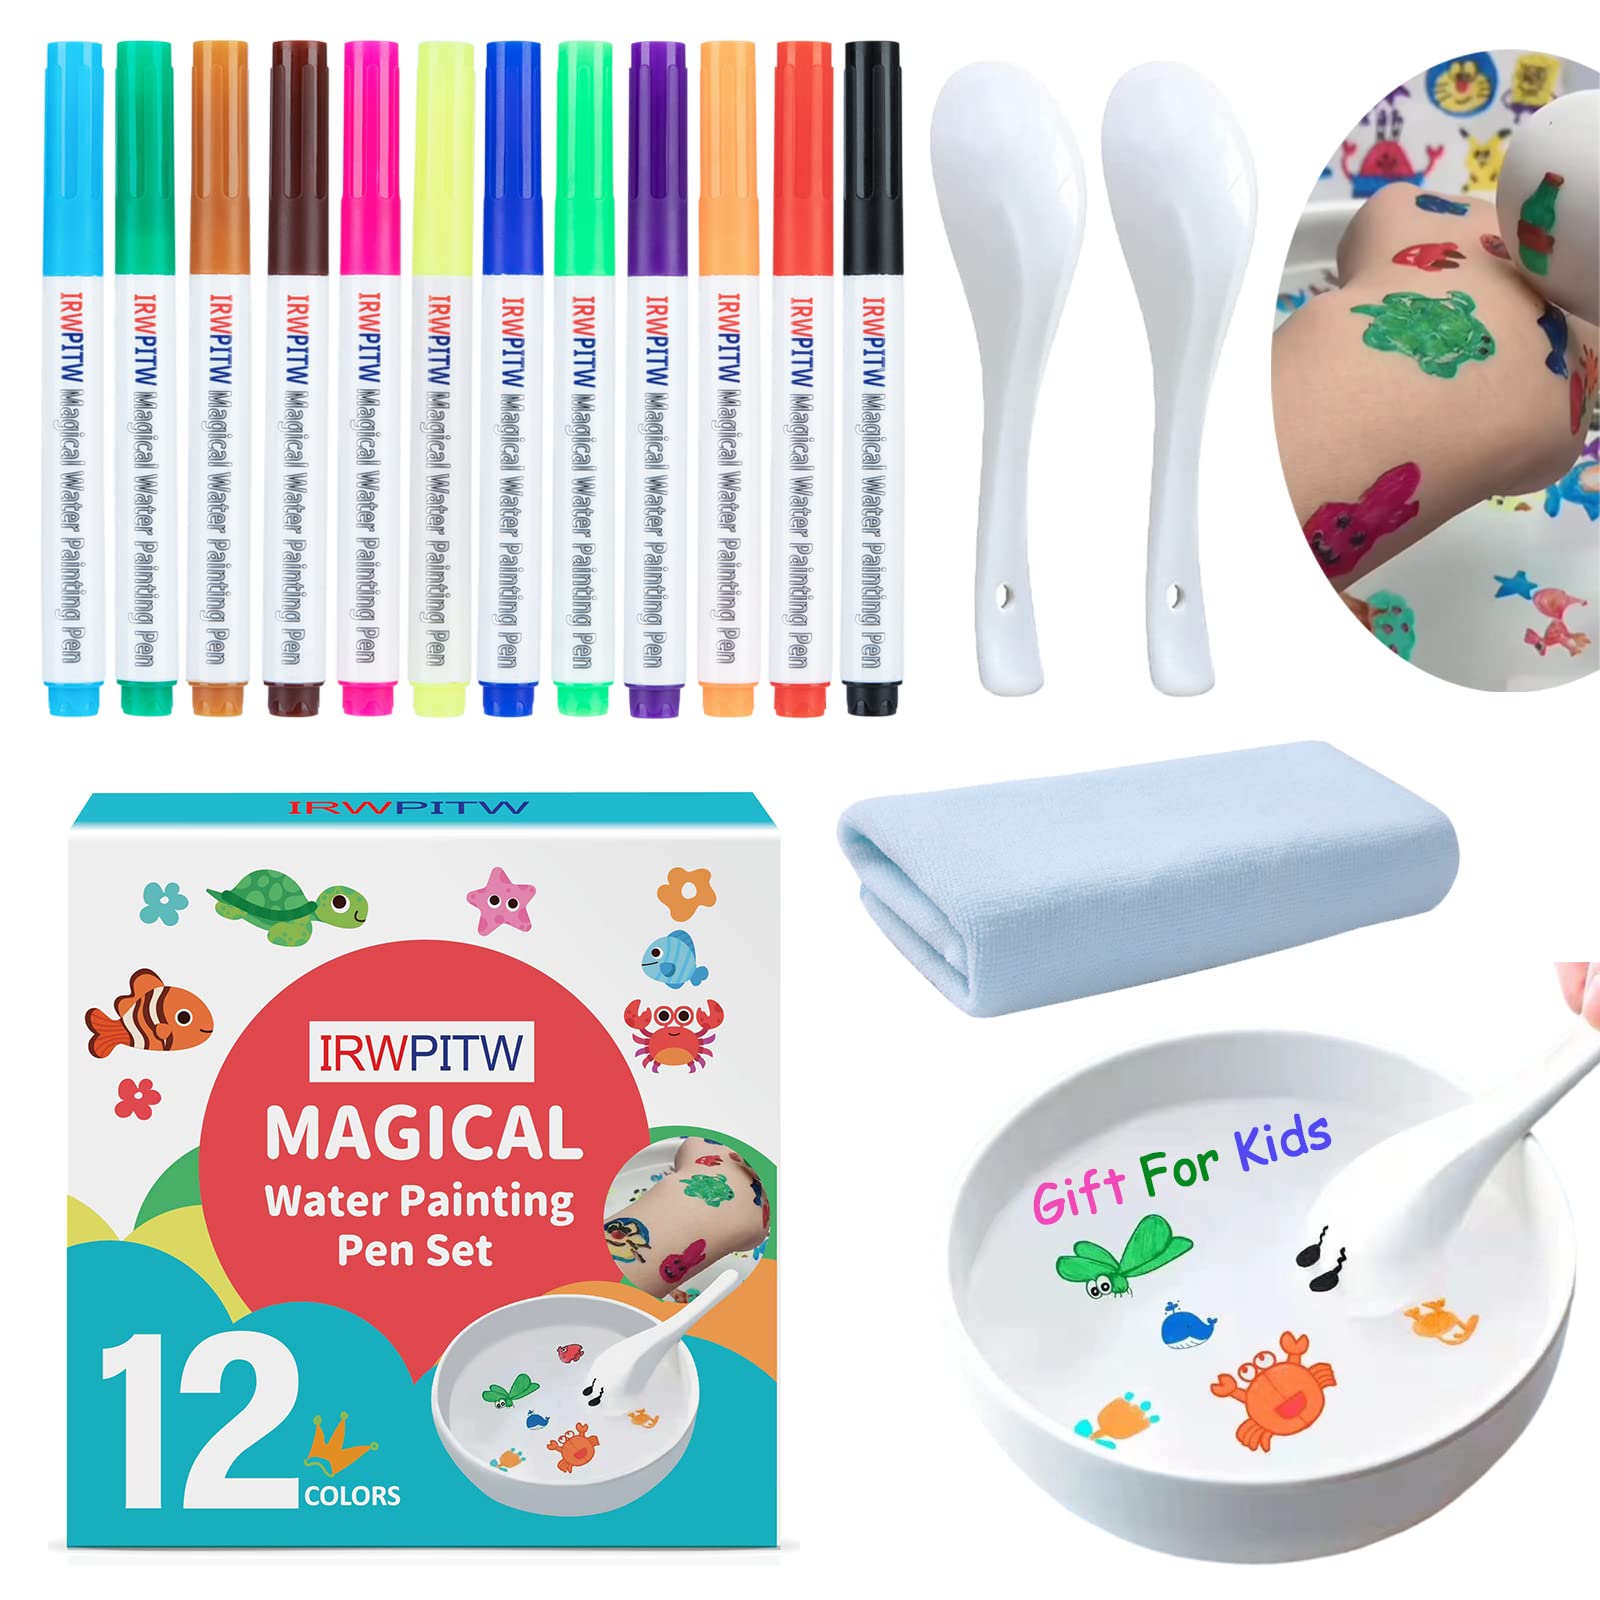 Amazon.com: IRWPITW Magical Water Painting Pens for Kids, 8 Colors Magic  Drawing Pen Bundle, Kiddies Create Magic Pen Floating Ink Drawings Set with  Spoons and Towel, Tattoo Water Marker Gifts for Boys